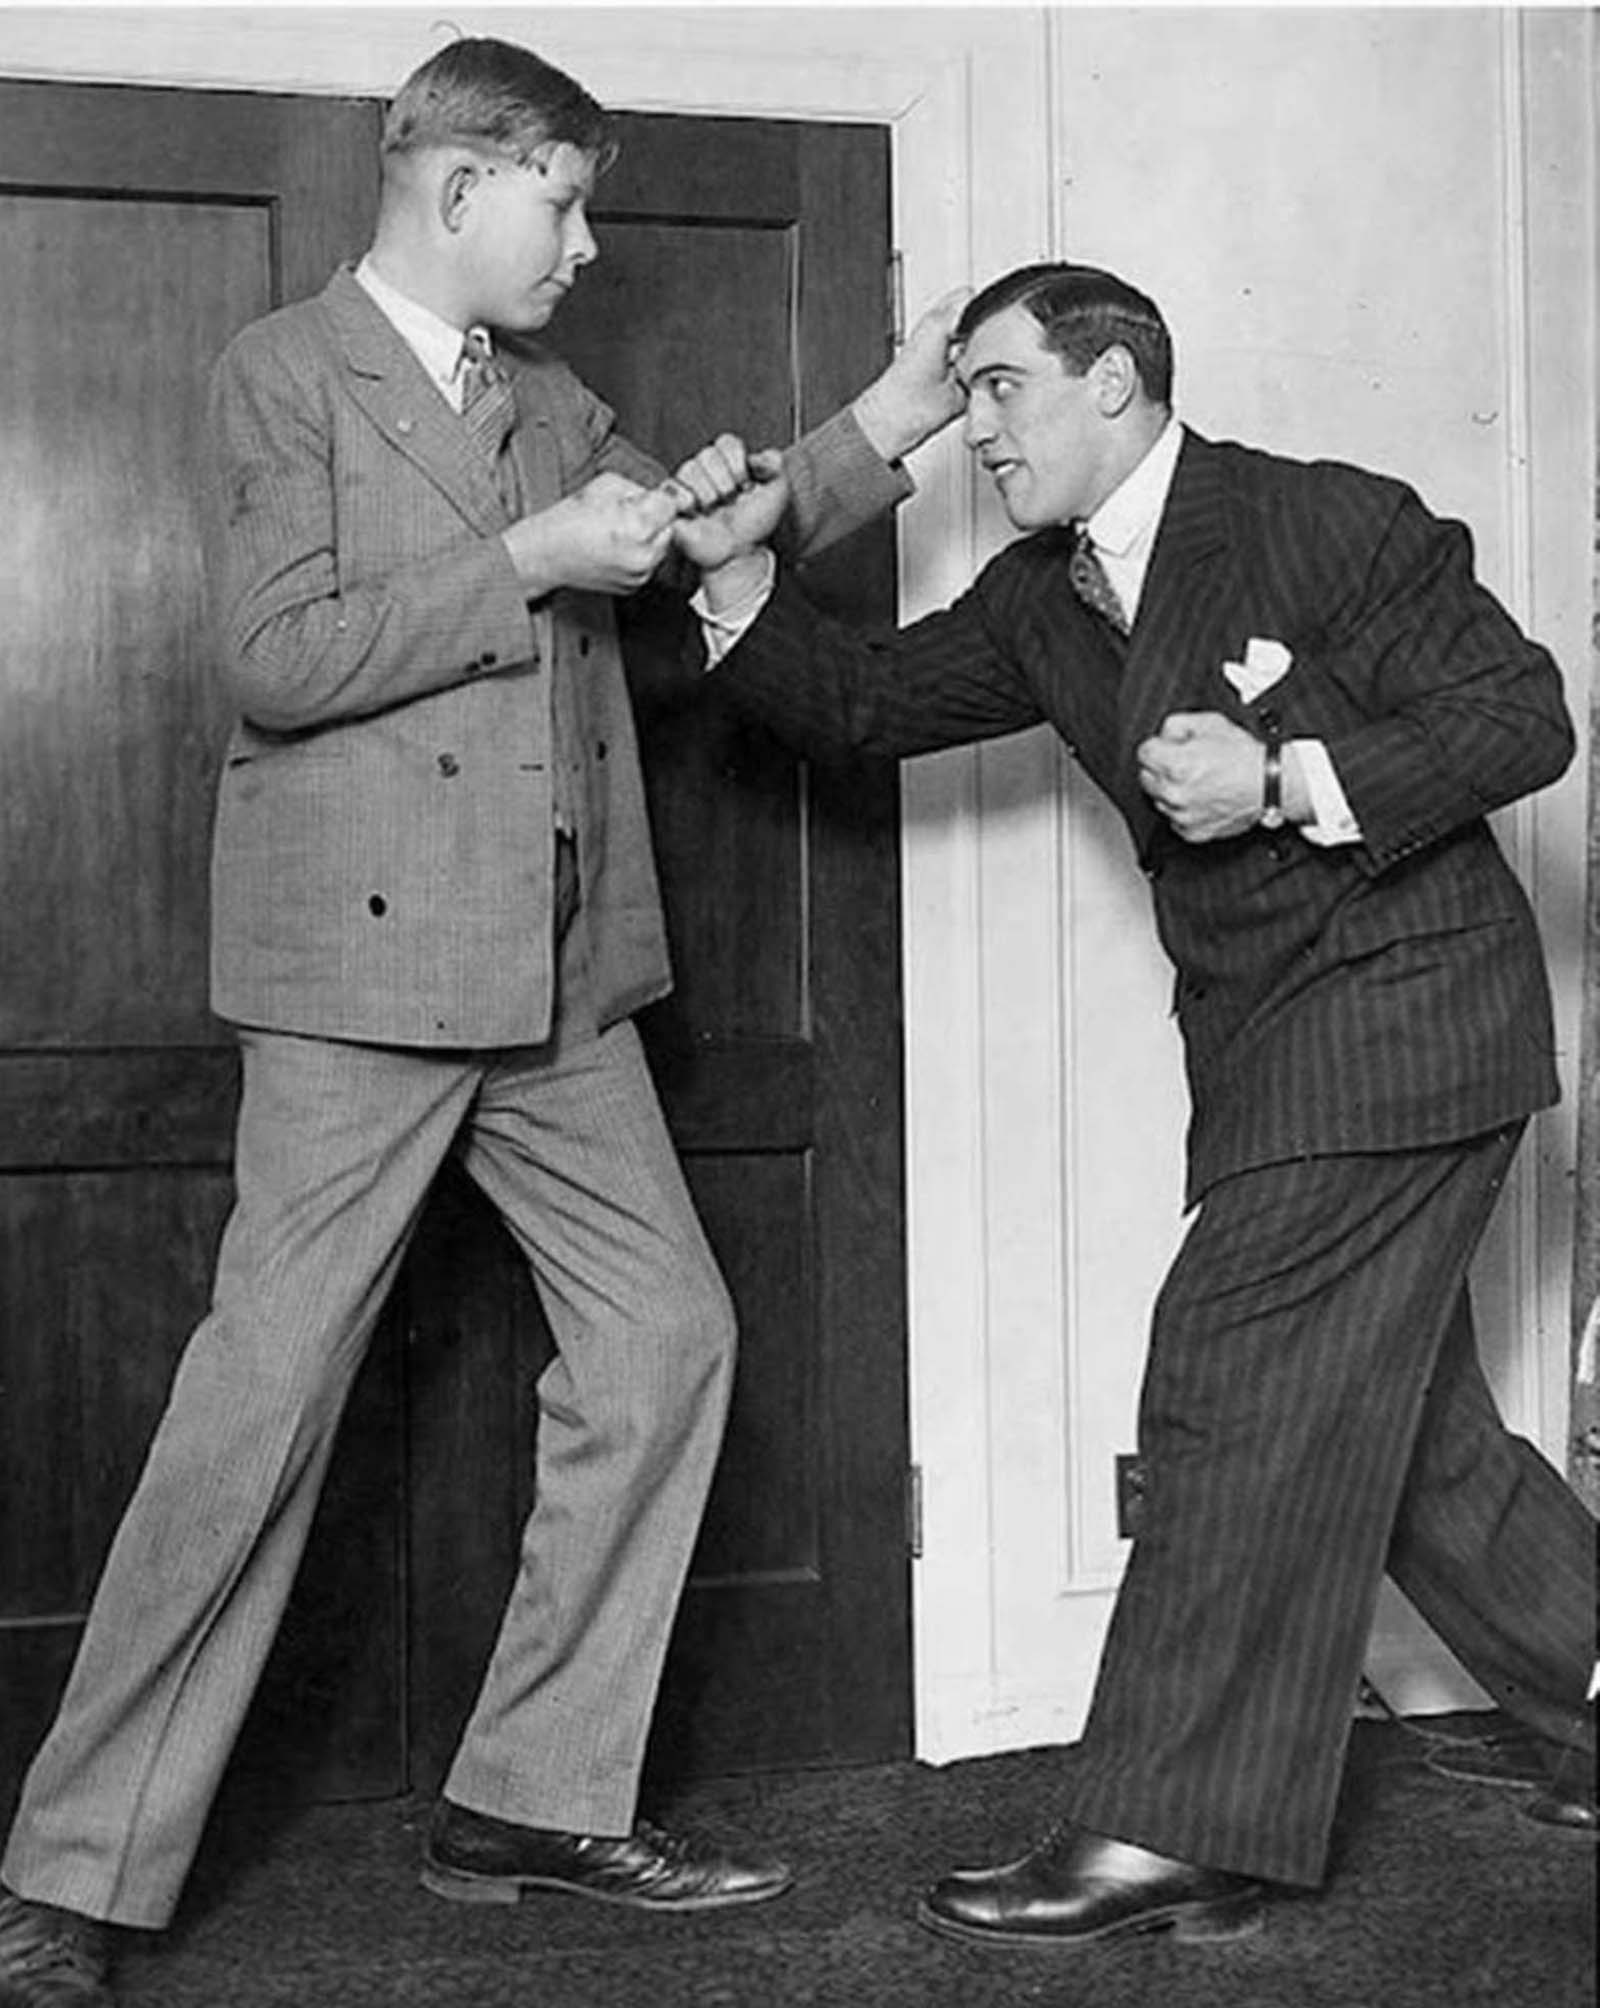 A 12-year-old Robert Wadlow with boxing legend, Primo Carnera. Primo was 6’9″ and Robert was 7’2″.